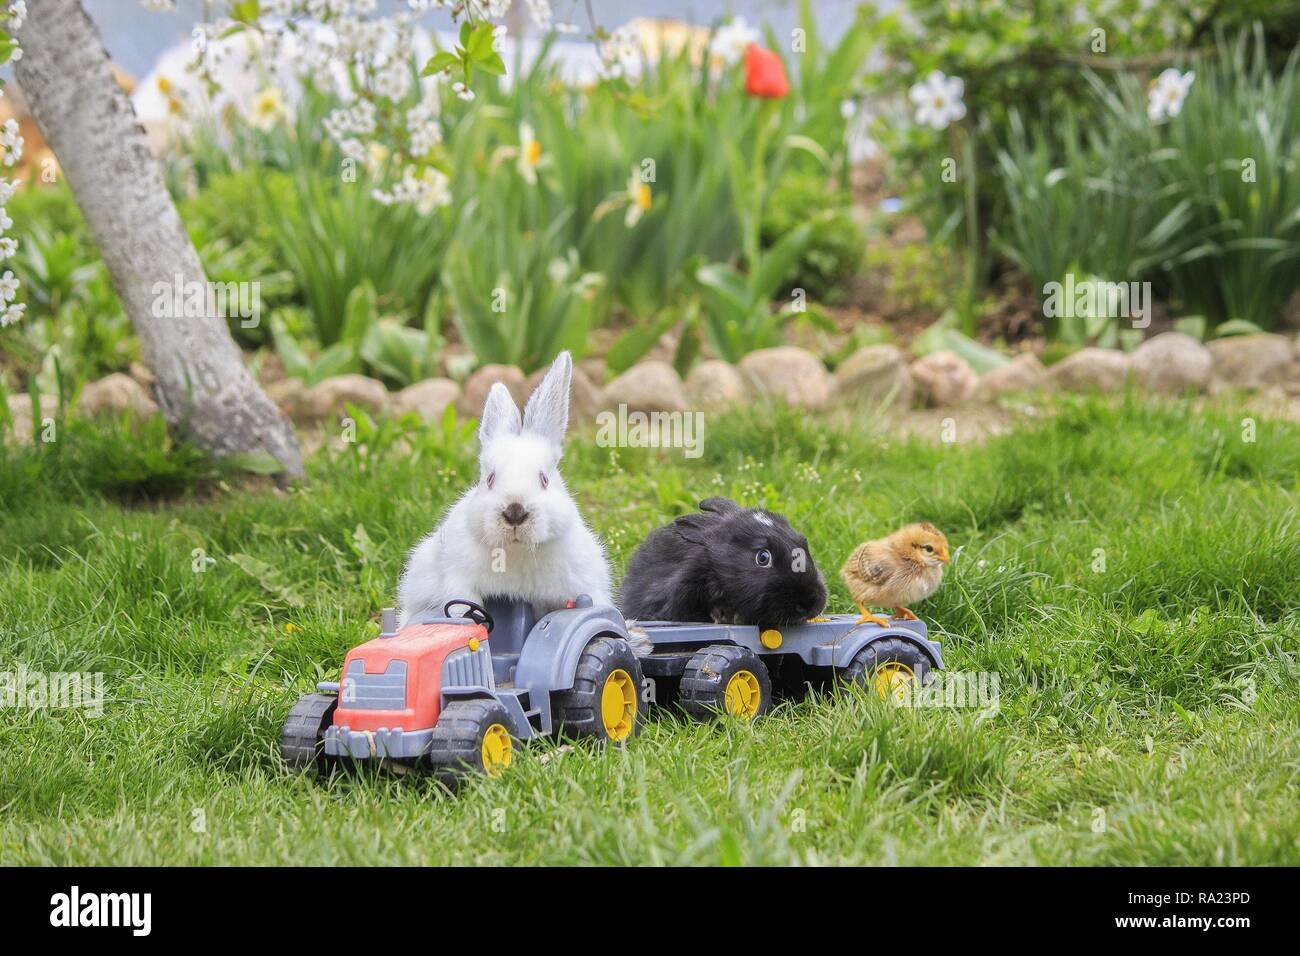 Pictorial photography with funny rabbits Stock Photo